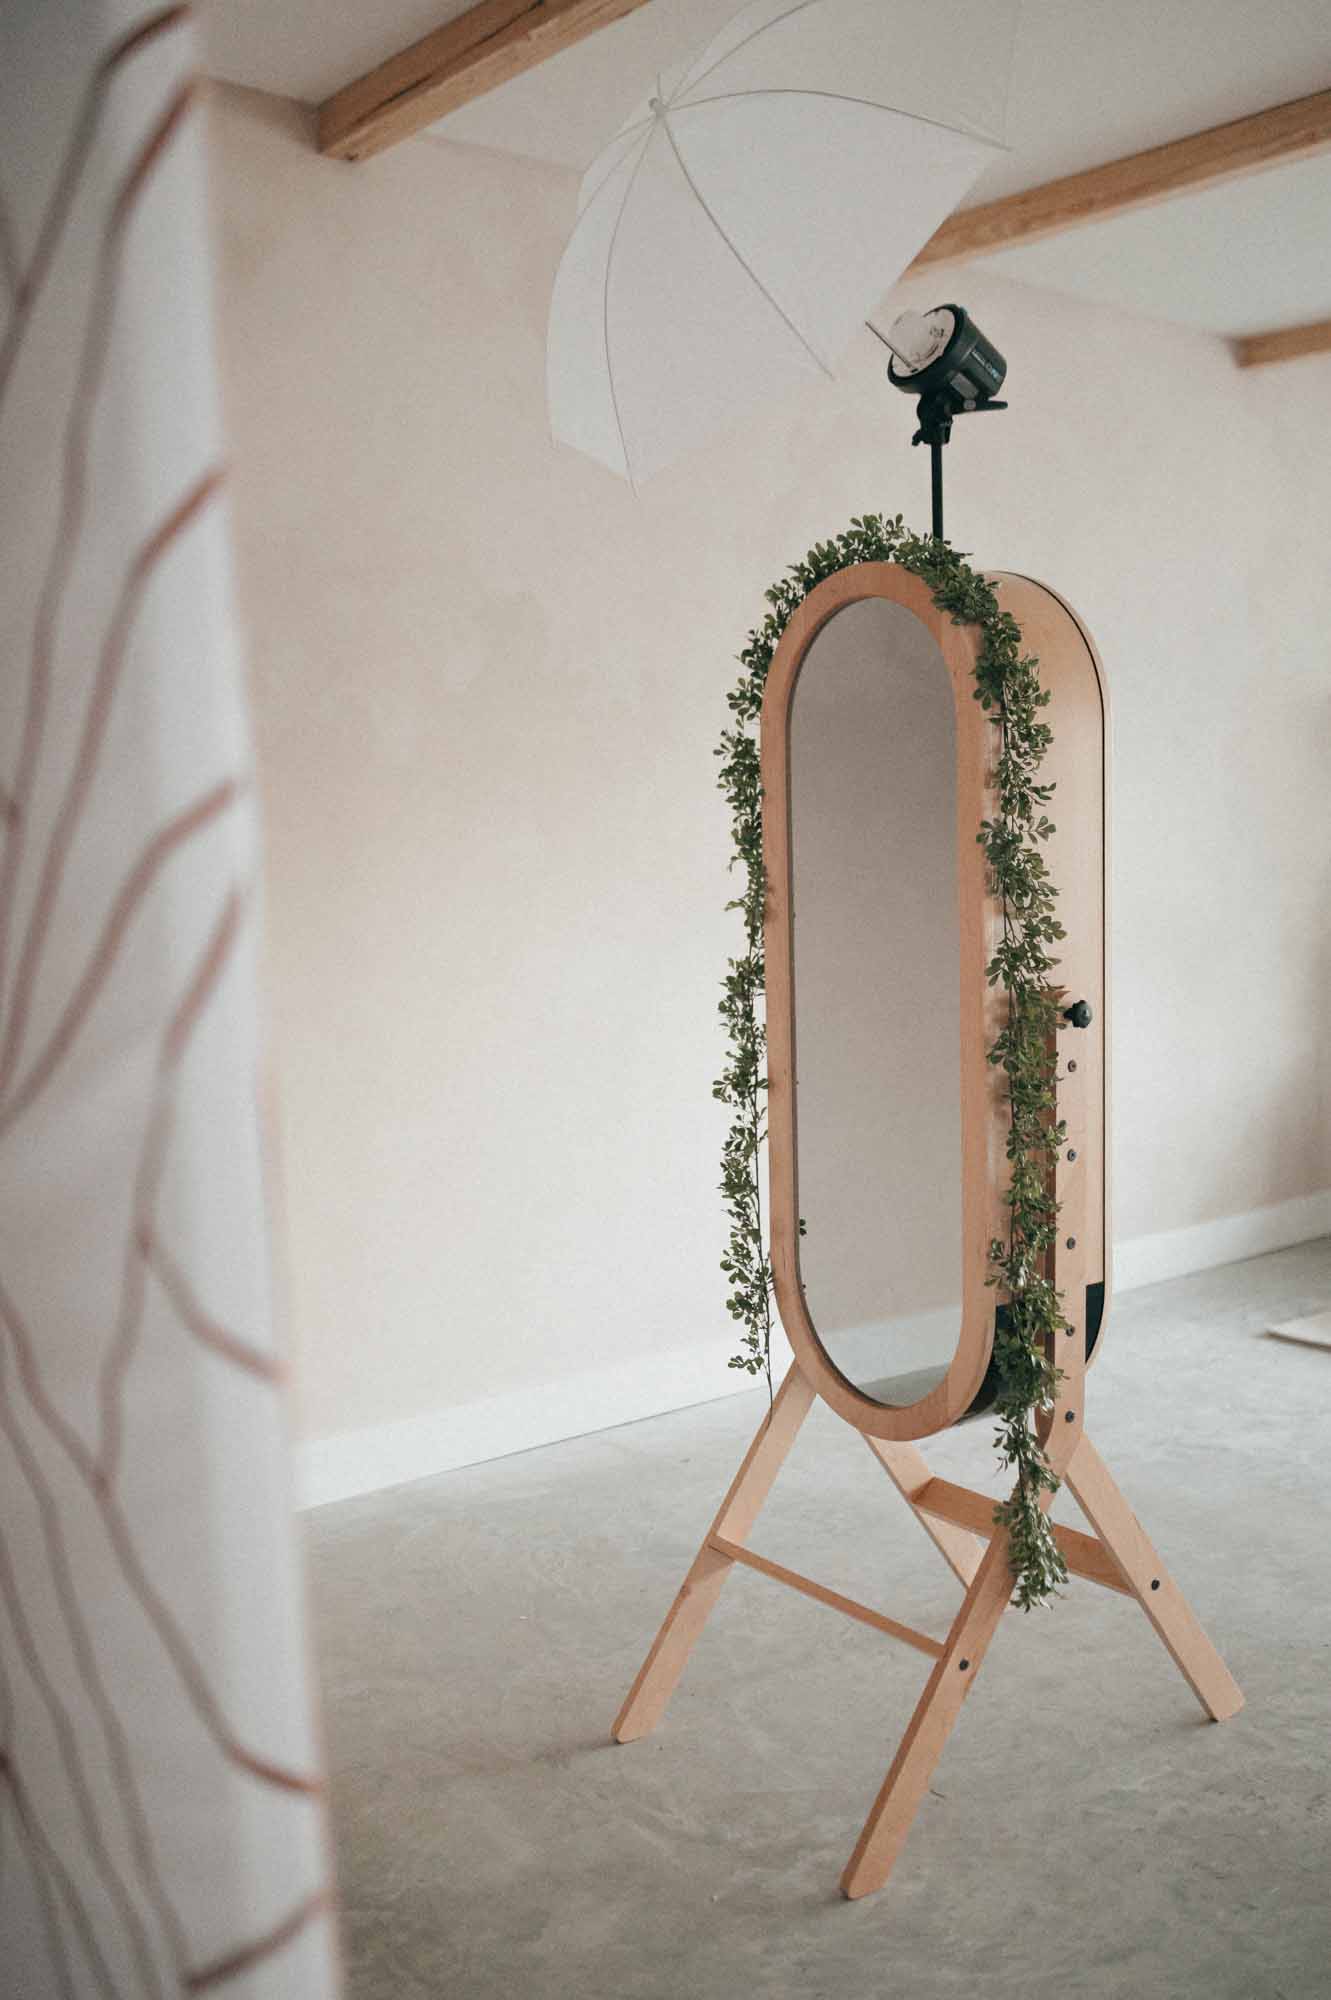 A mirror with a garland hanging from it